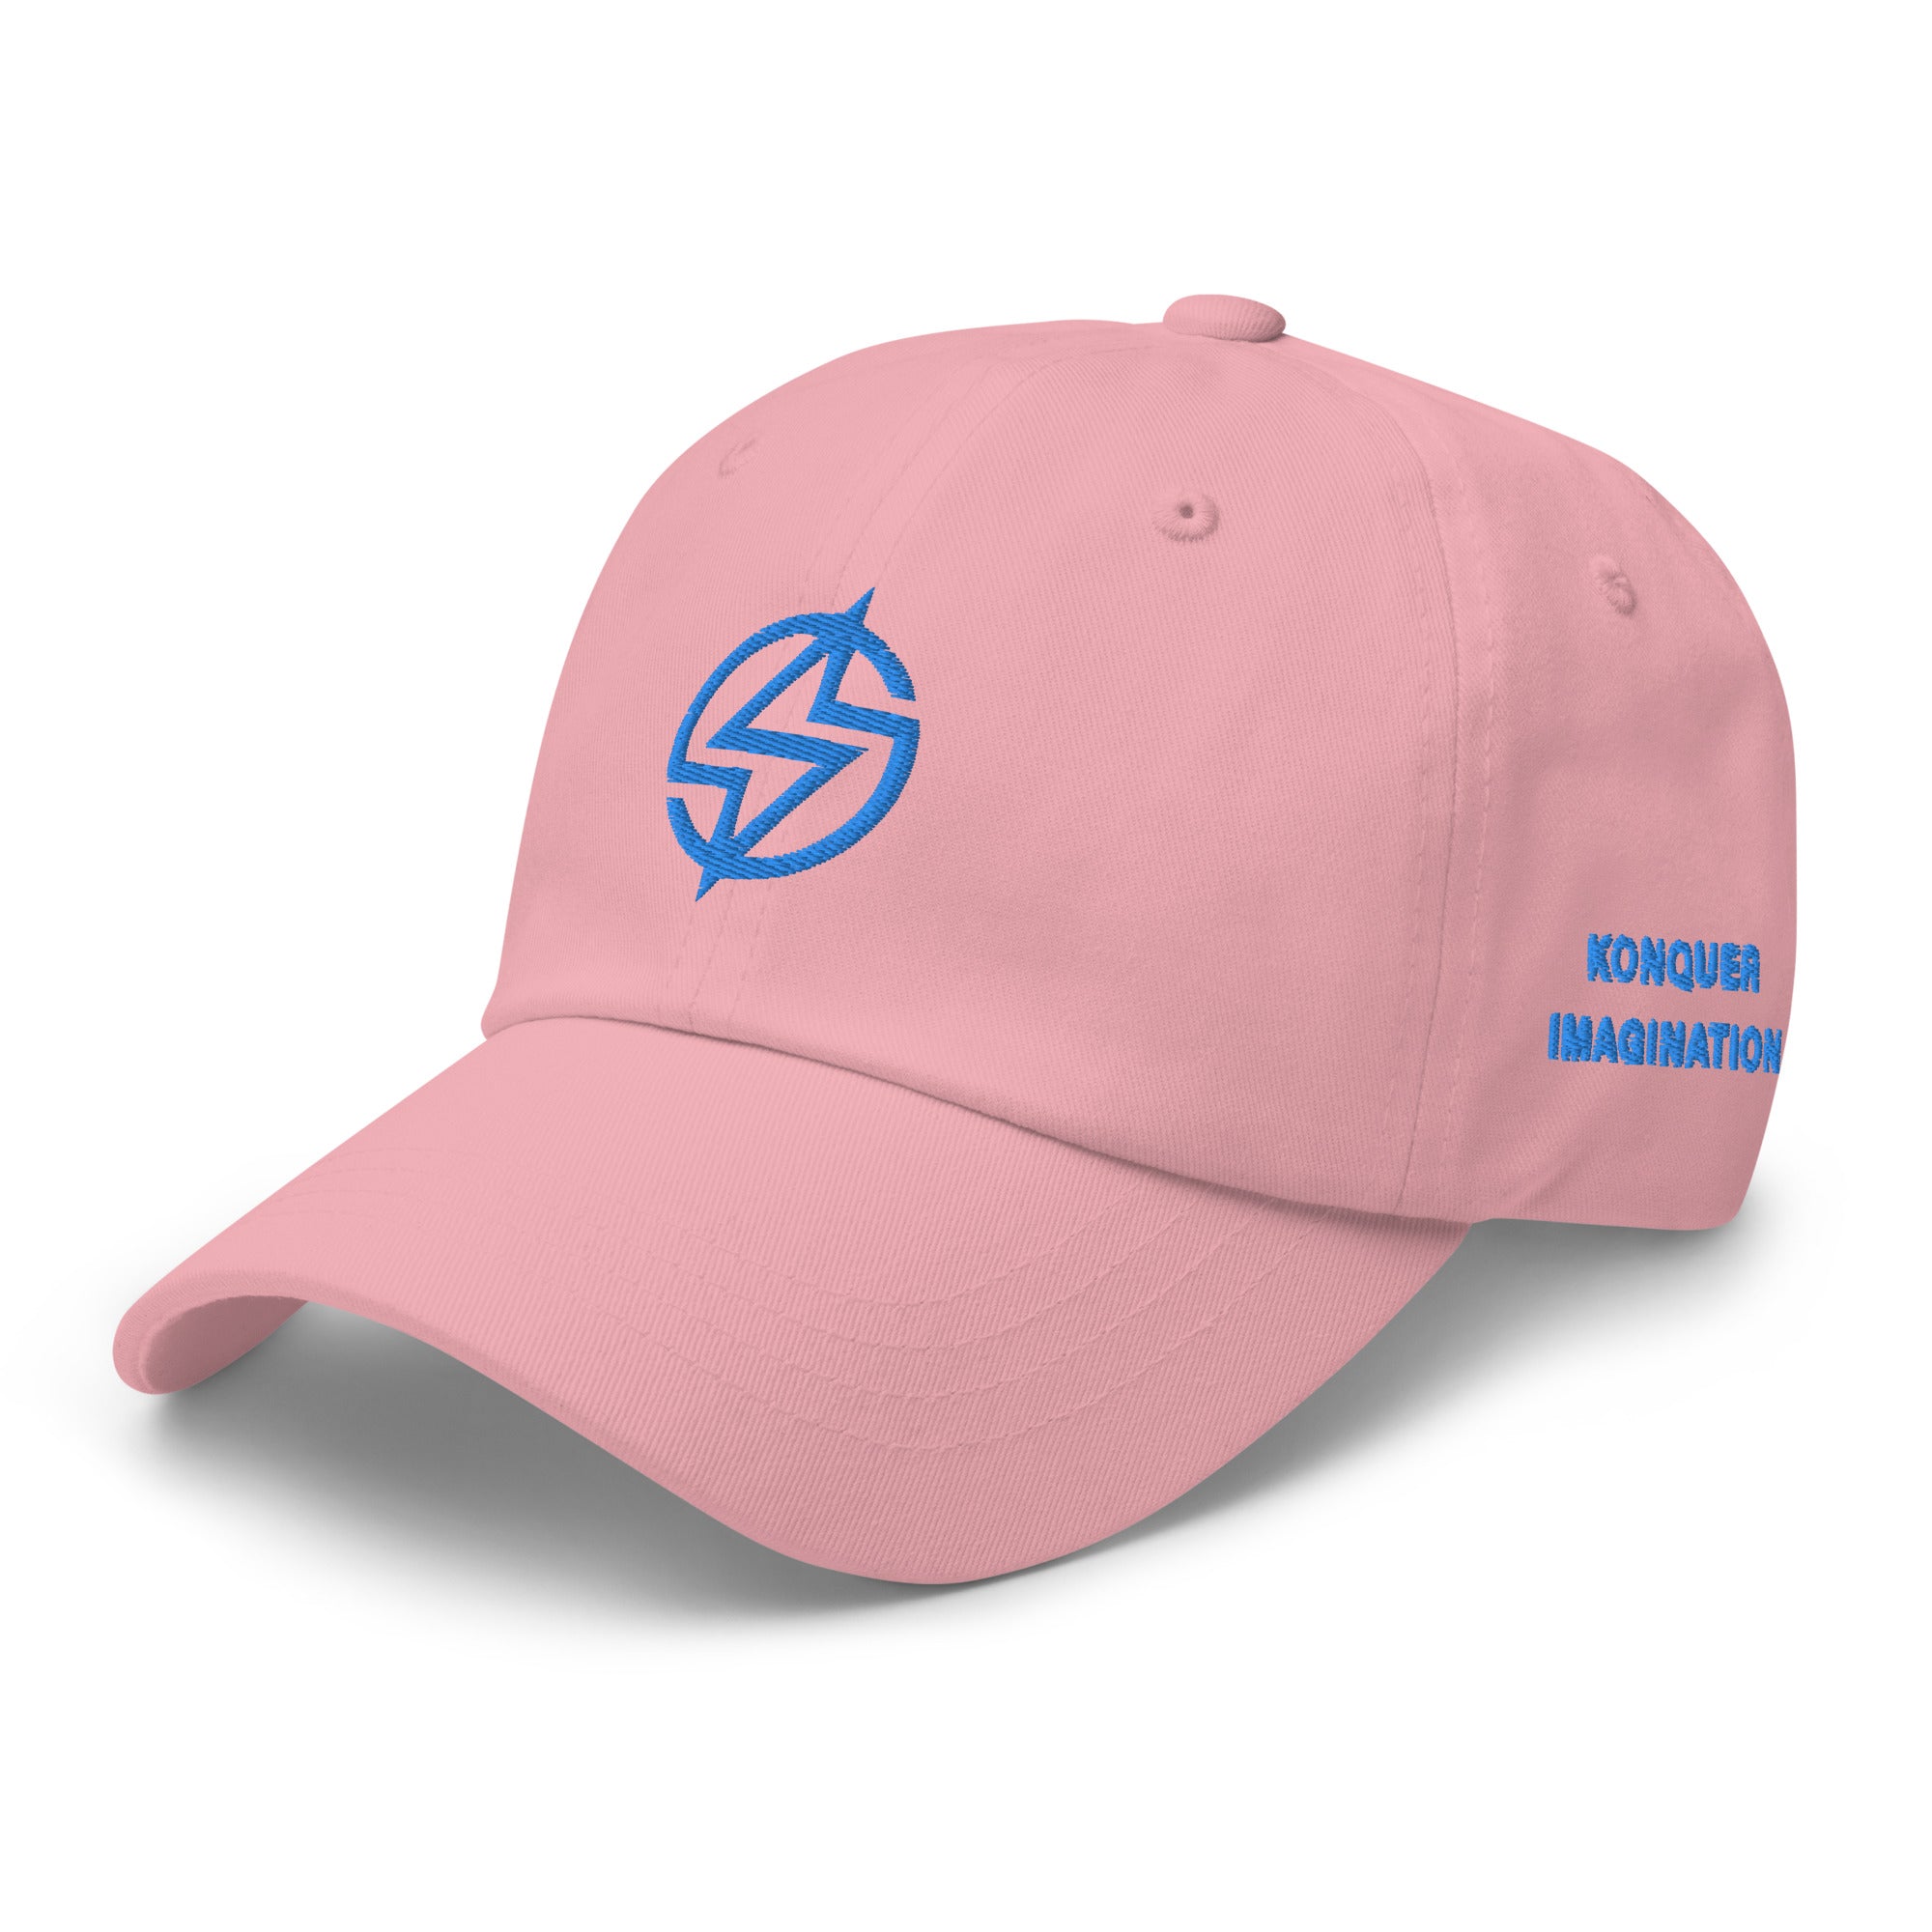 Pink dad hat with blue embroidery